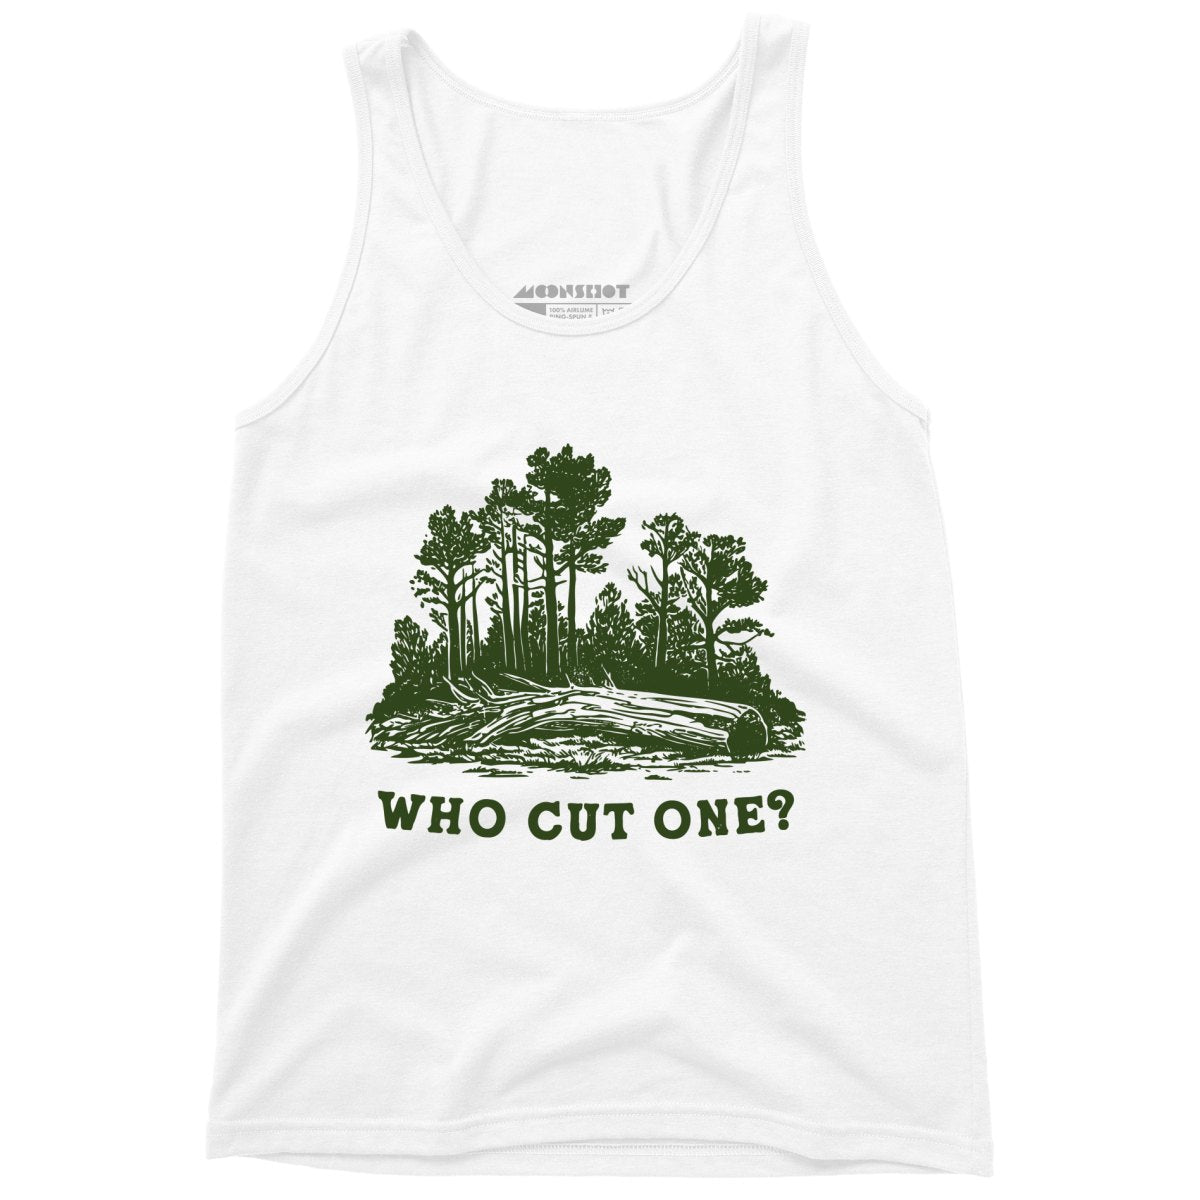 Who Cut One? - Unisex Tank Top